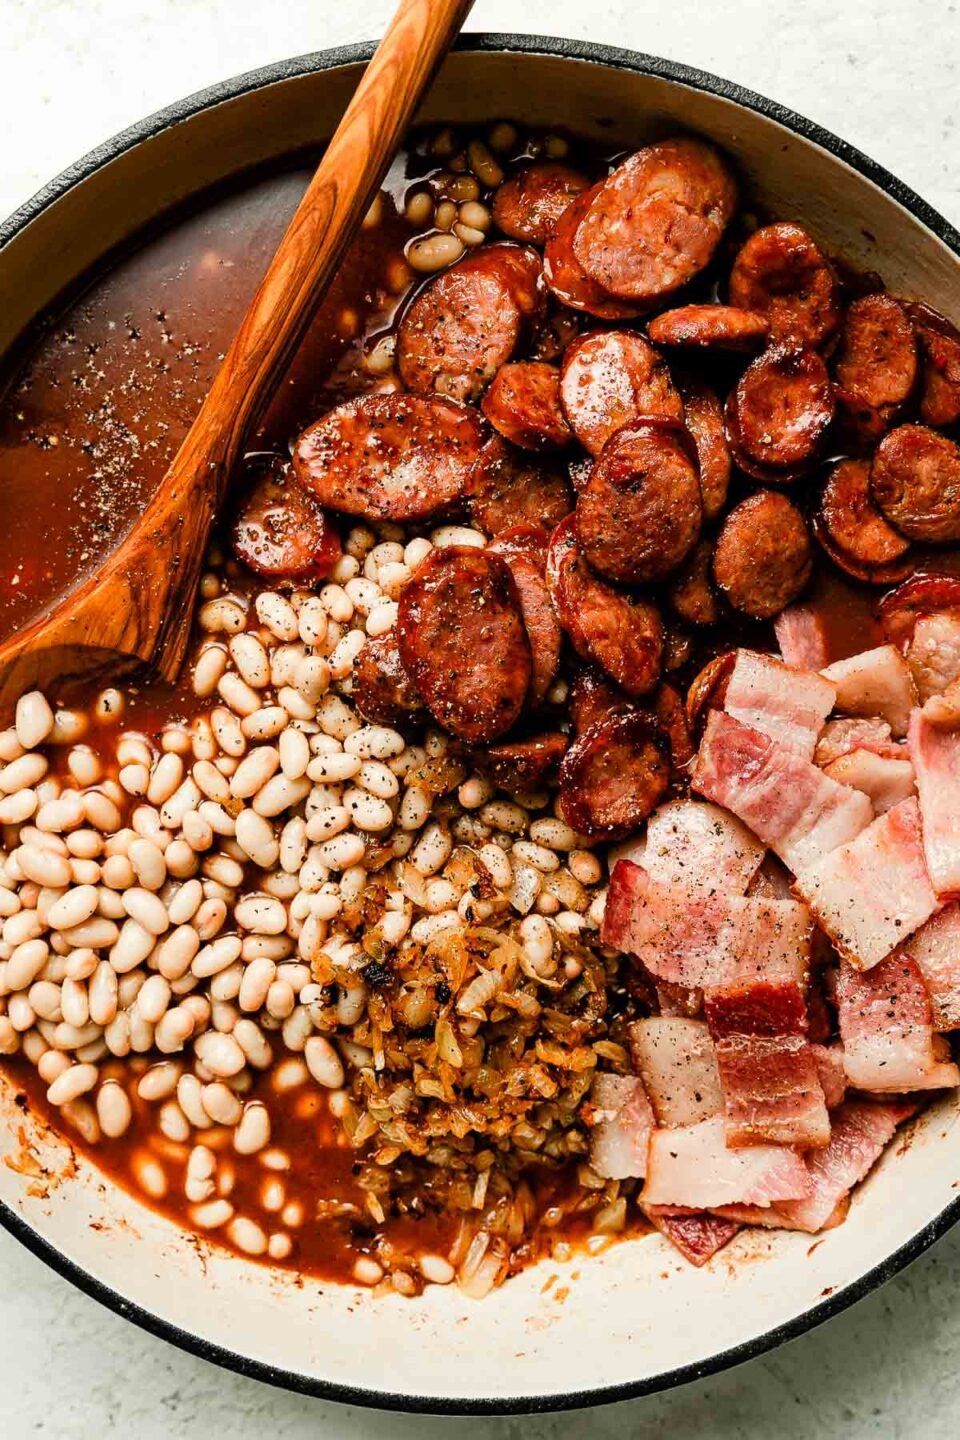 Prepared brown sugar baked beans ingredients sit in a white skillet atop a white surface: rendered bacon, cooked sausage, sauce, beans & onions.